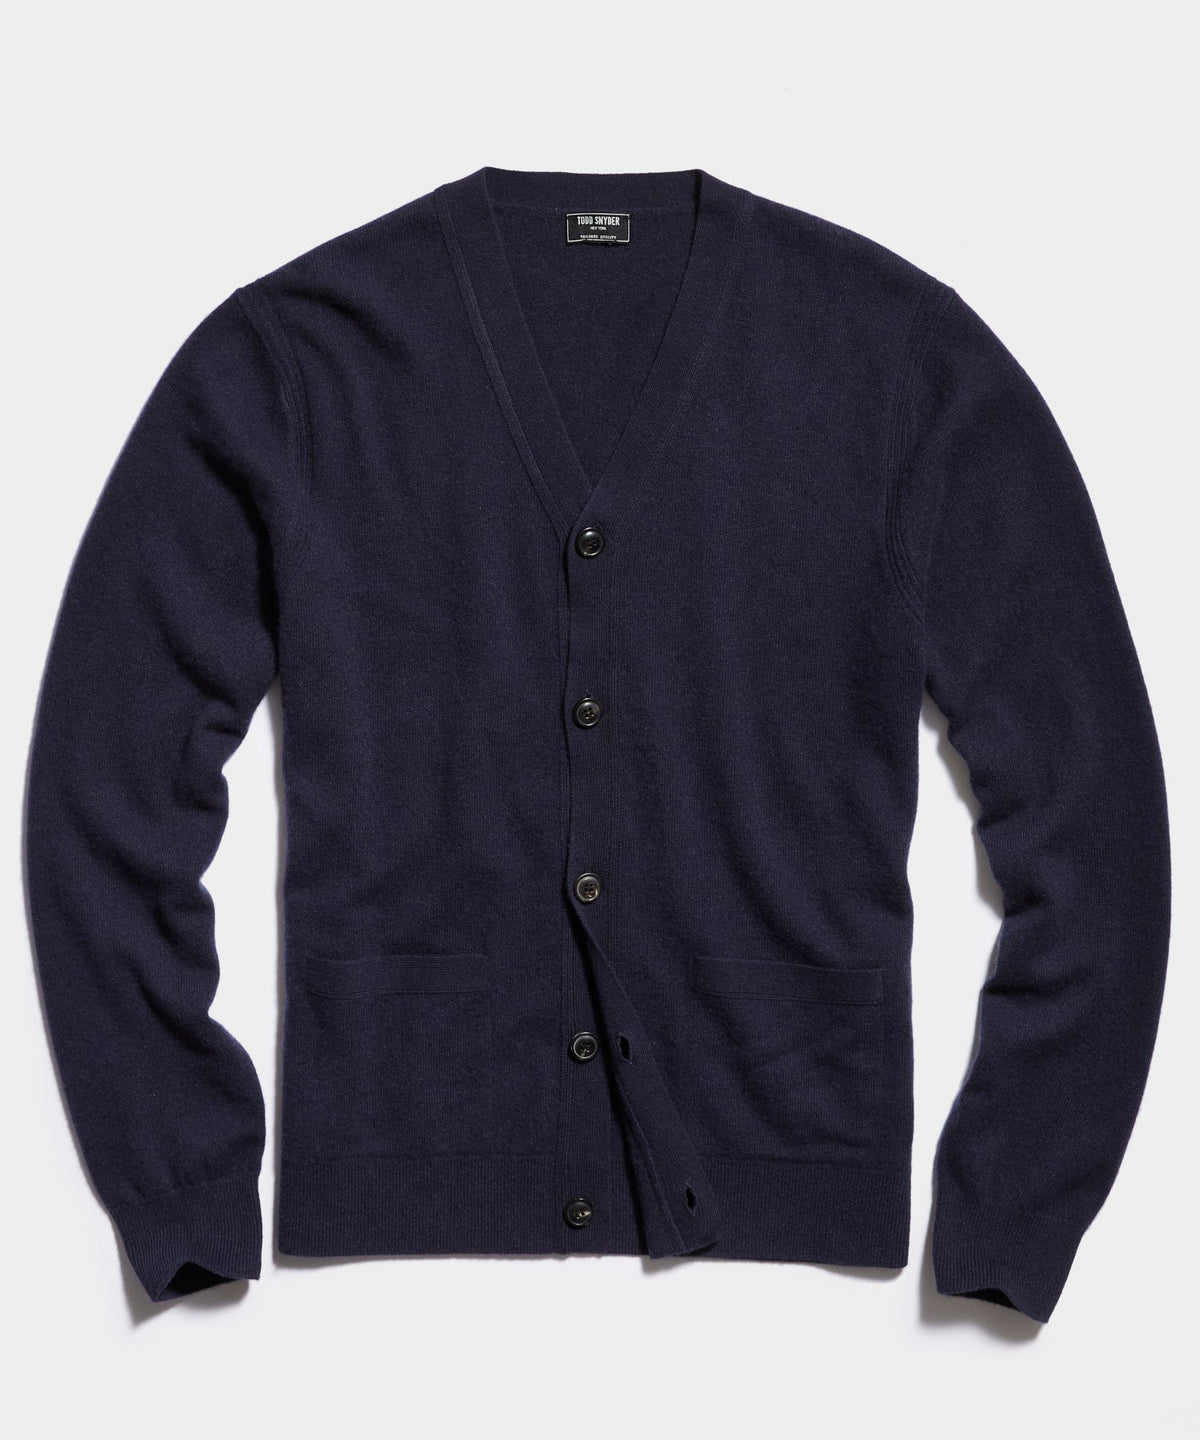 Cashmere Cardigan in Navy